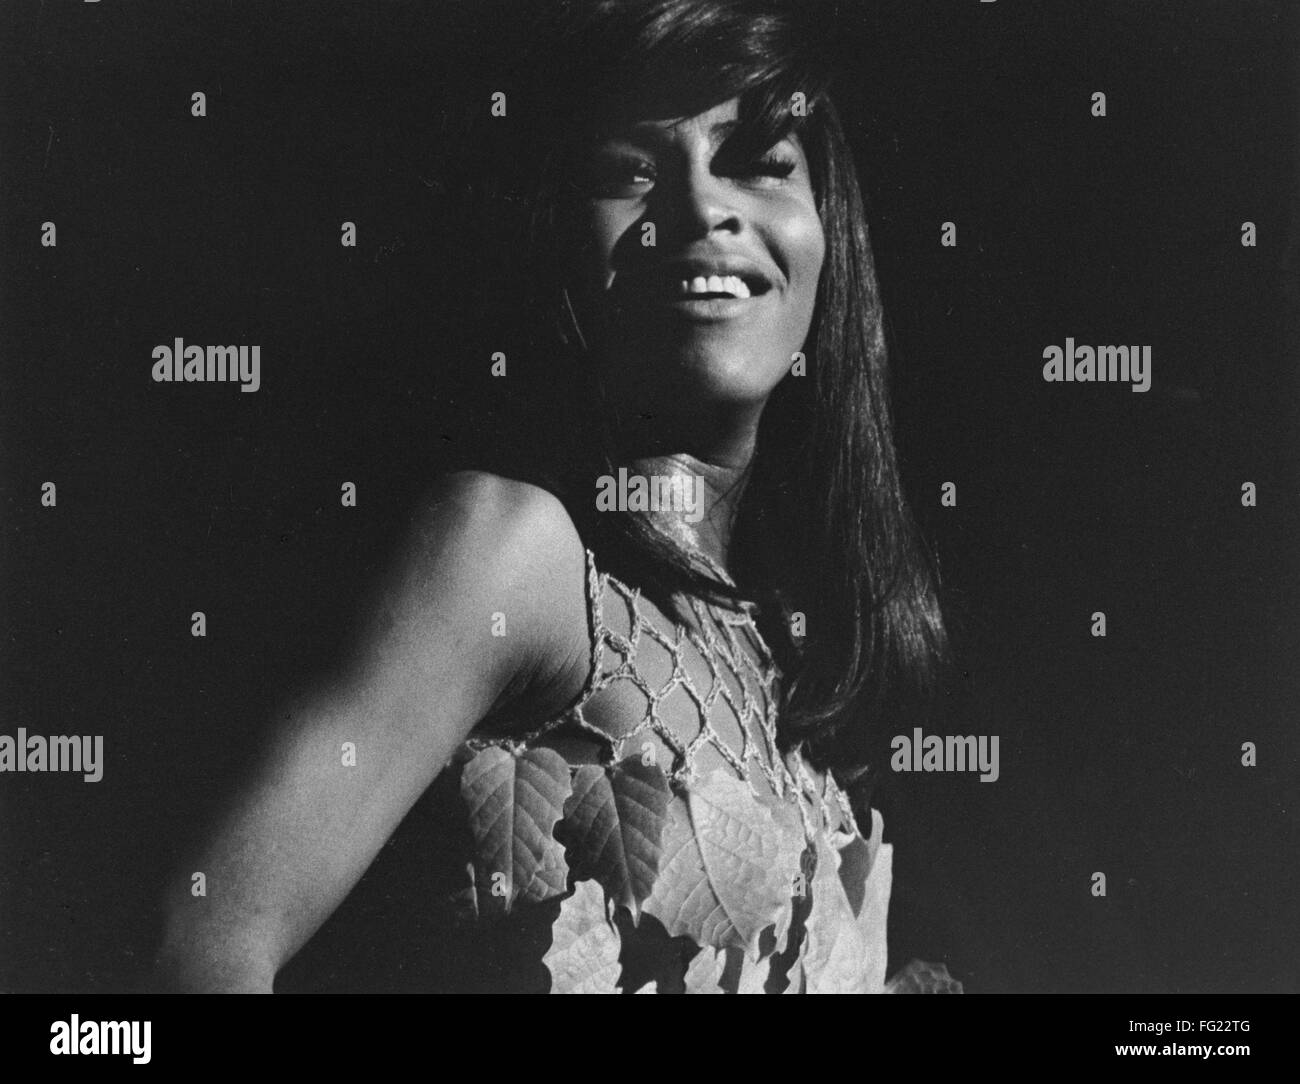 TINA TURNER (1939-). /nAmerican singer Tina Turner performs at Las Vegas in 1969. Full credit: Richard Busch / Granger, NYC -- All Rights Reserved. Stock Photo